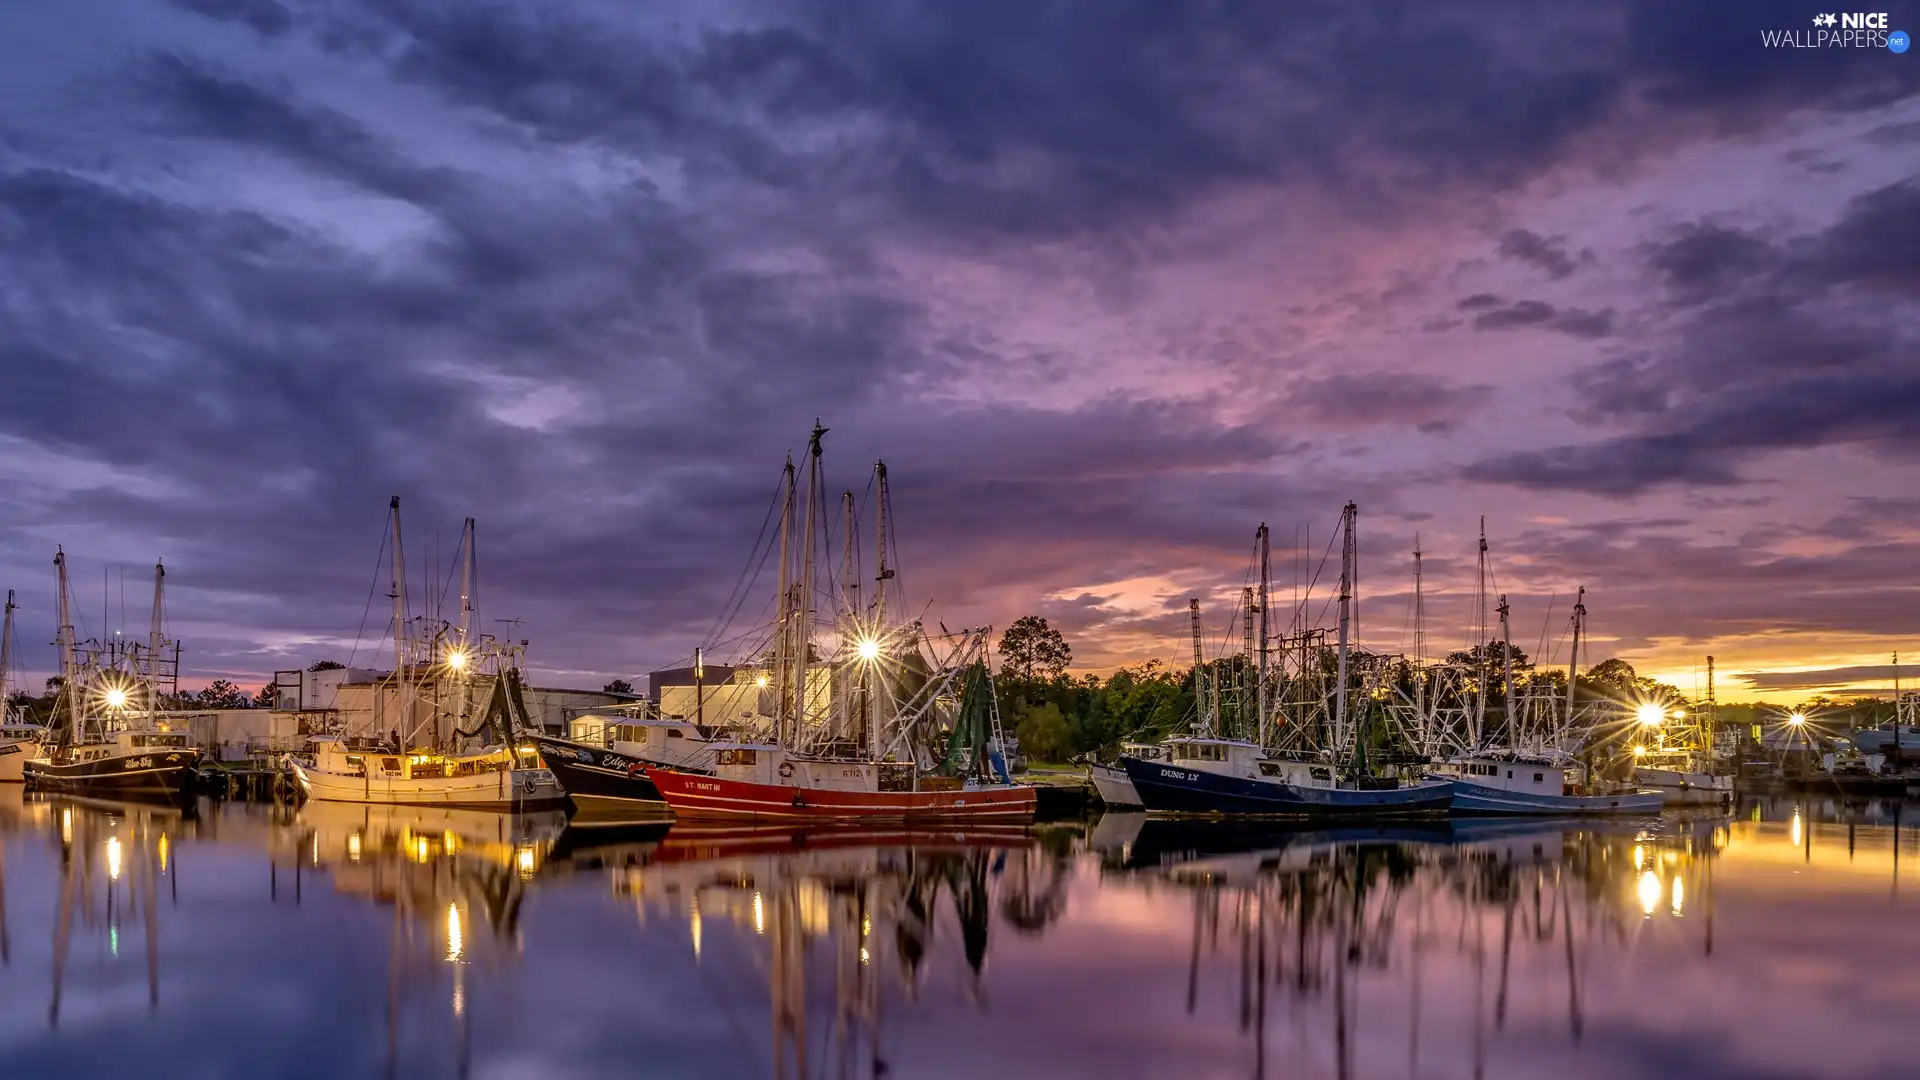 viewes, Sailboats, Great Sunsets, trees, port, light, clouds